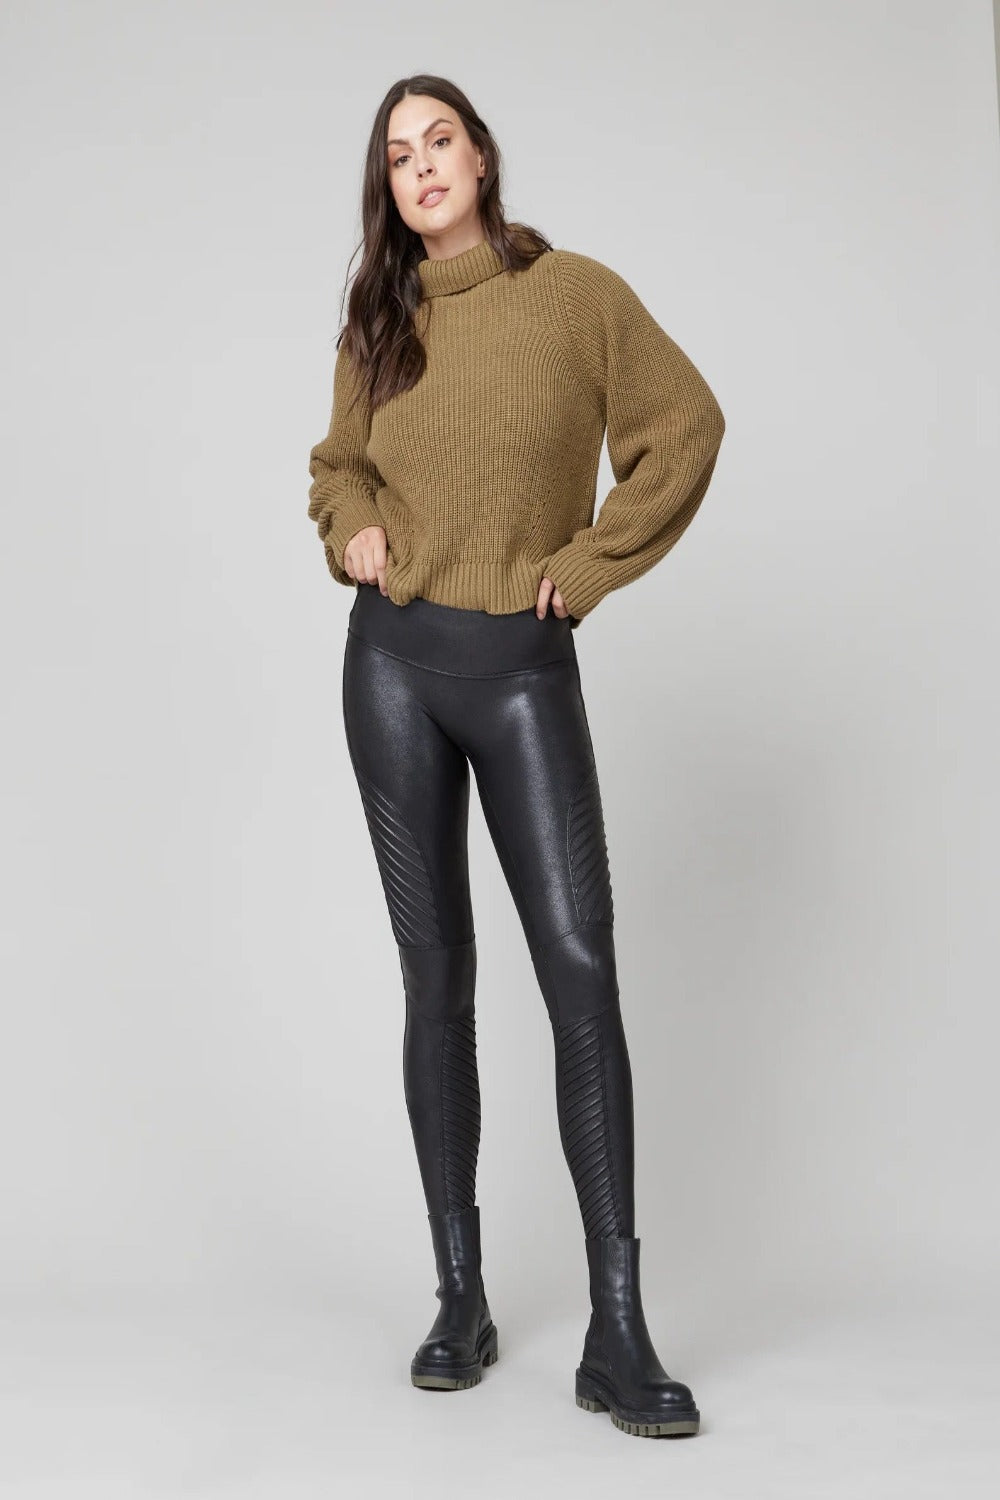 Spanx® Black Faux Leather Leggings - All Bottoms